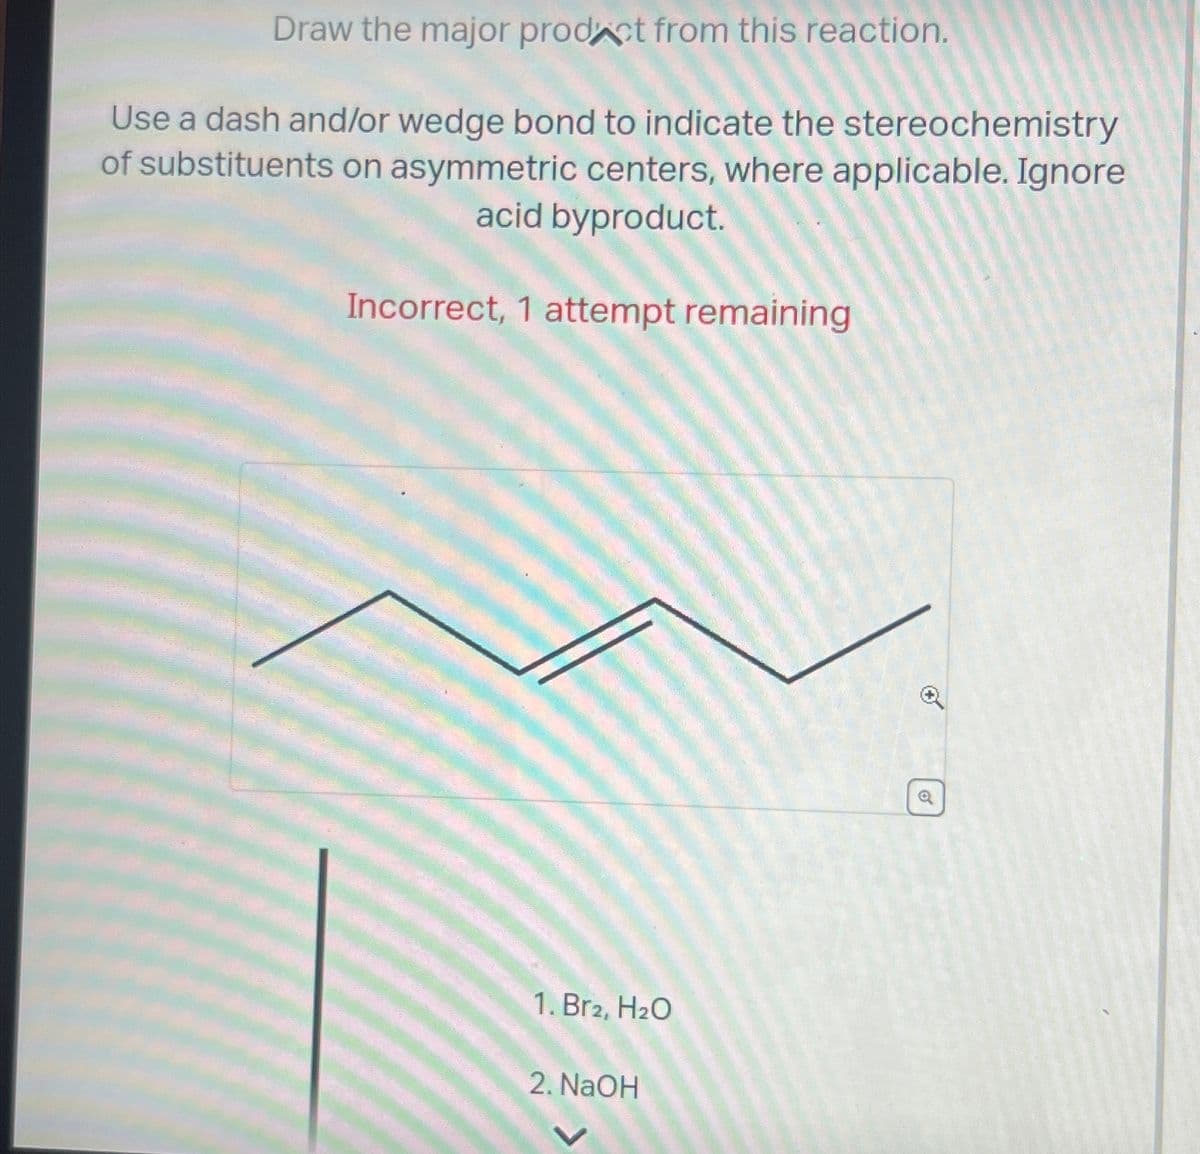 Draw the major prodct from this reaction.
Use a dash and/or wedge bond to indicate the stereochemistry
of substituents on asymmetric centers, where applicable. Ignore
acid byproduct.
Incorrect, 1 attempt remaining
1. Br2, H₂O
2. NaOH
0